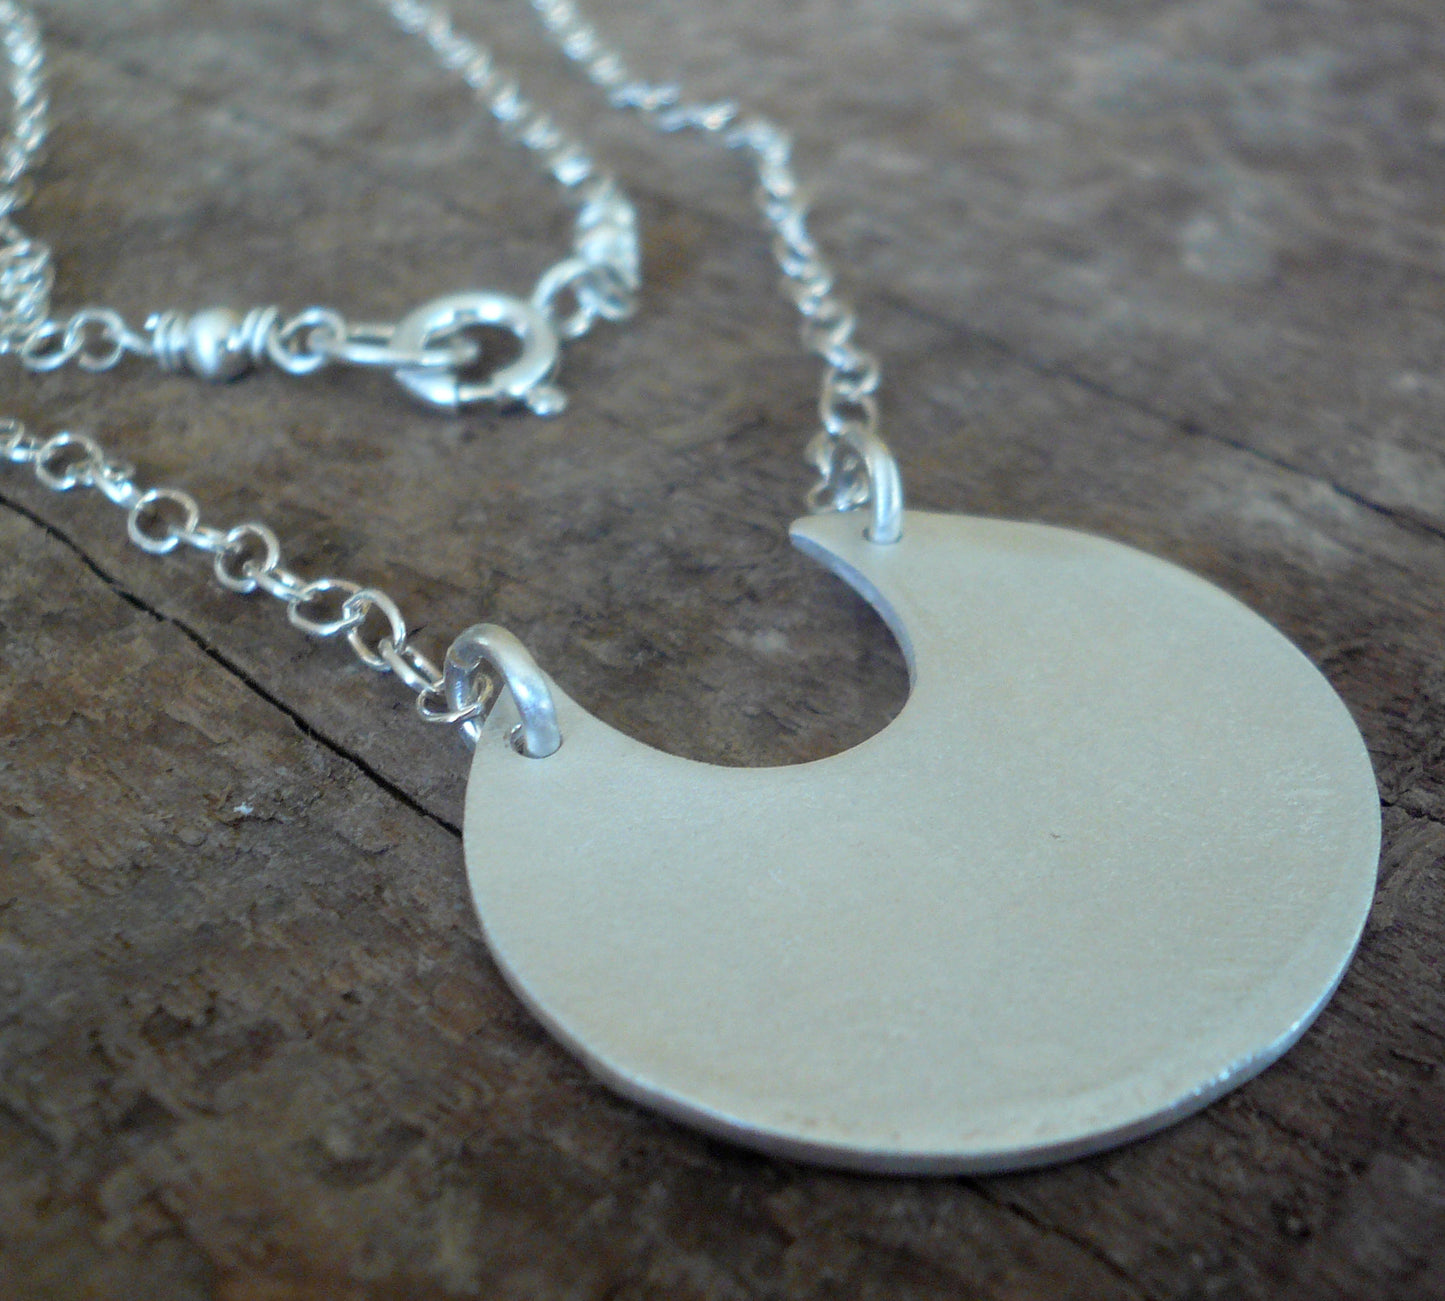 Lacuna Collection Necklace - Handmade. Brushed Fine Silver Pendant Necklace